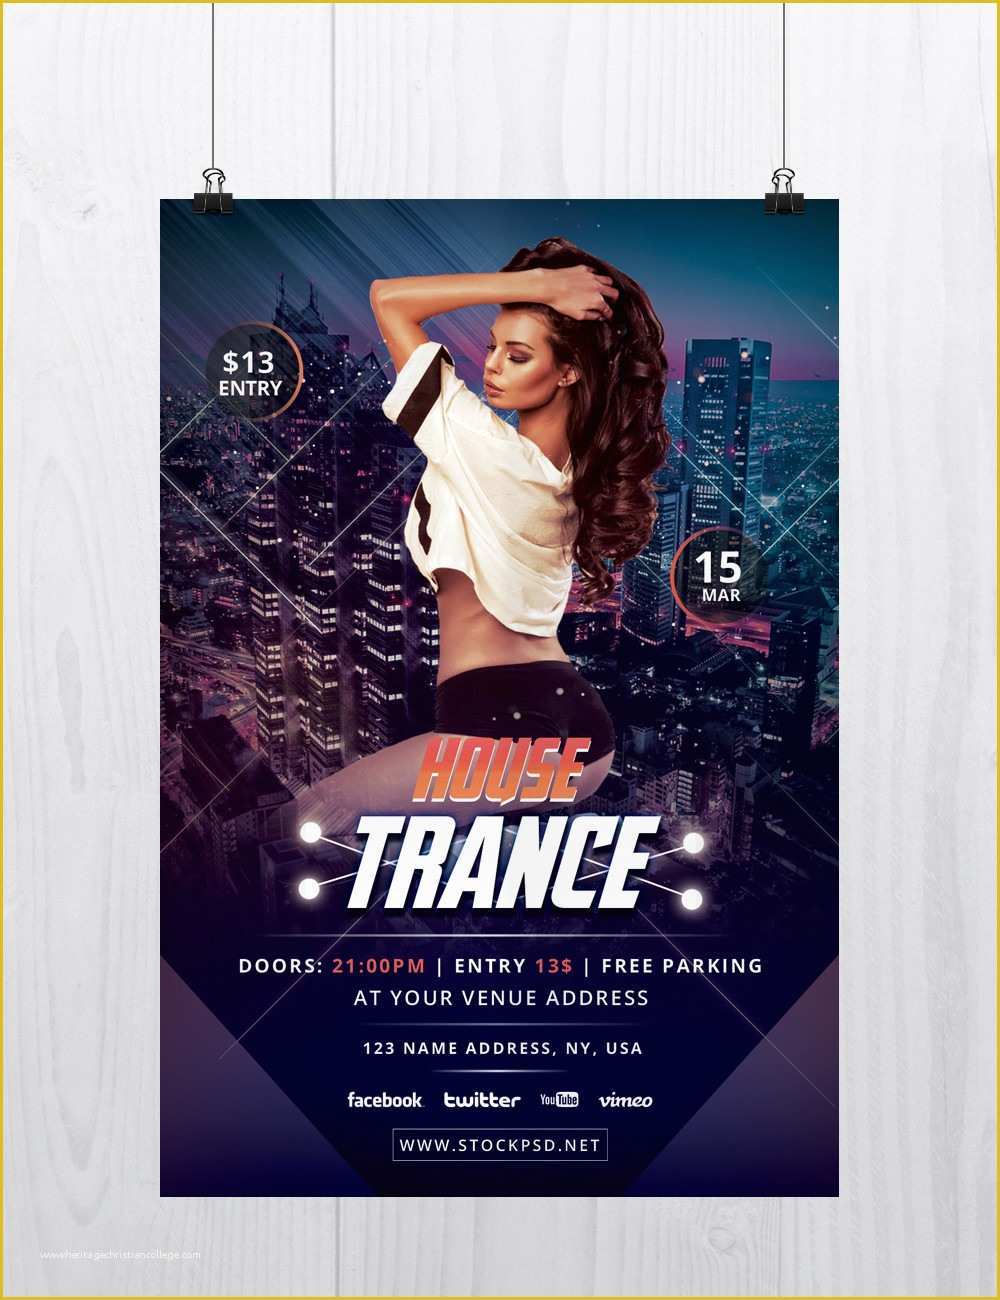 Free Psd Flyer Templates Of House Trance Download Free Psd Flyer Template Free Psd